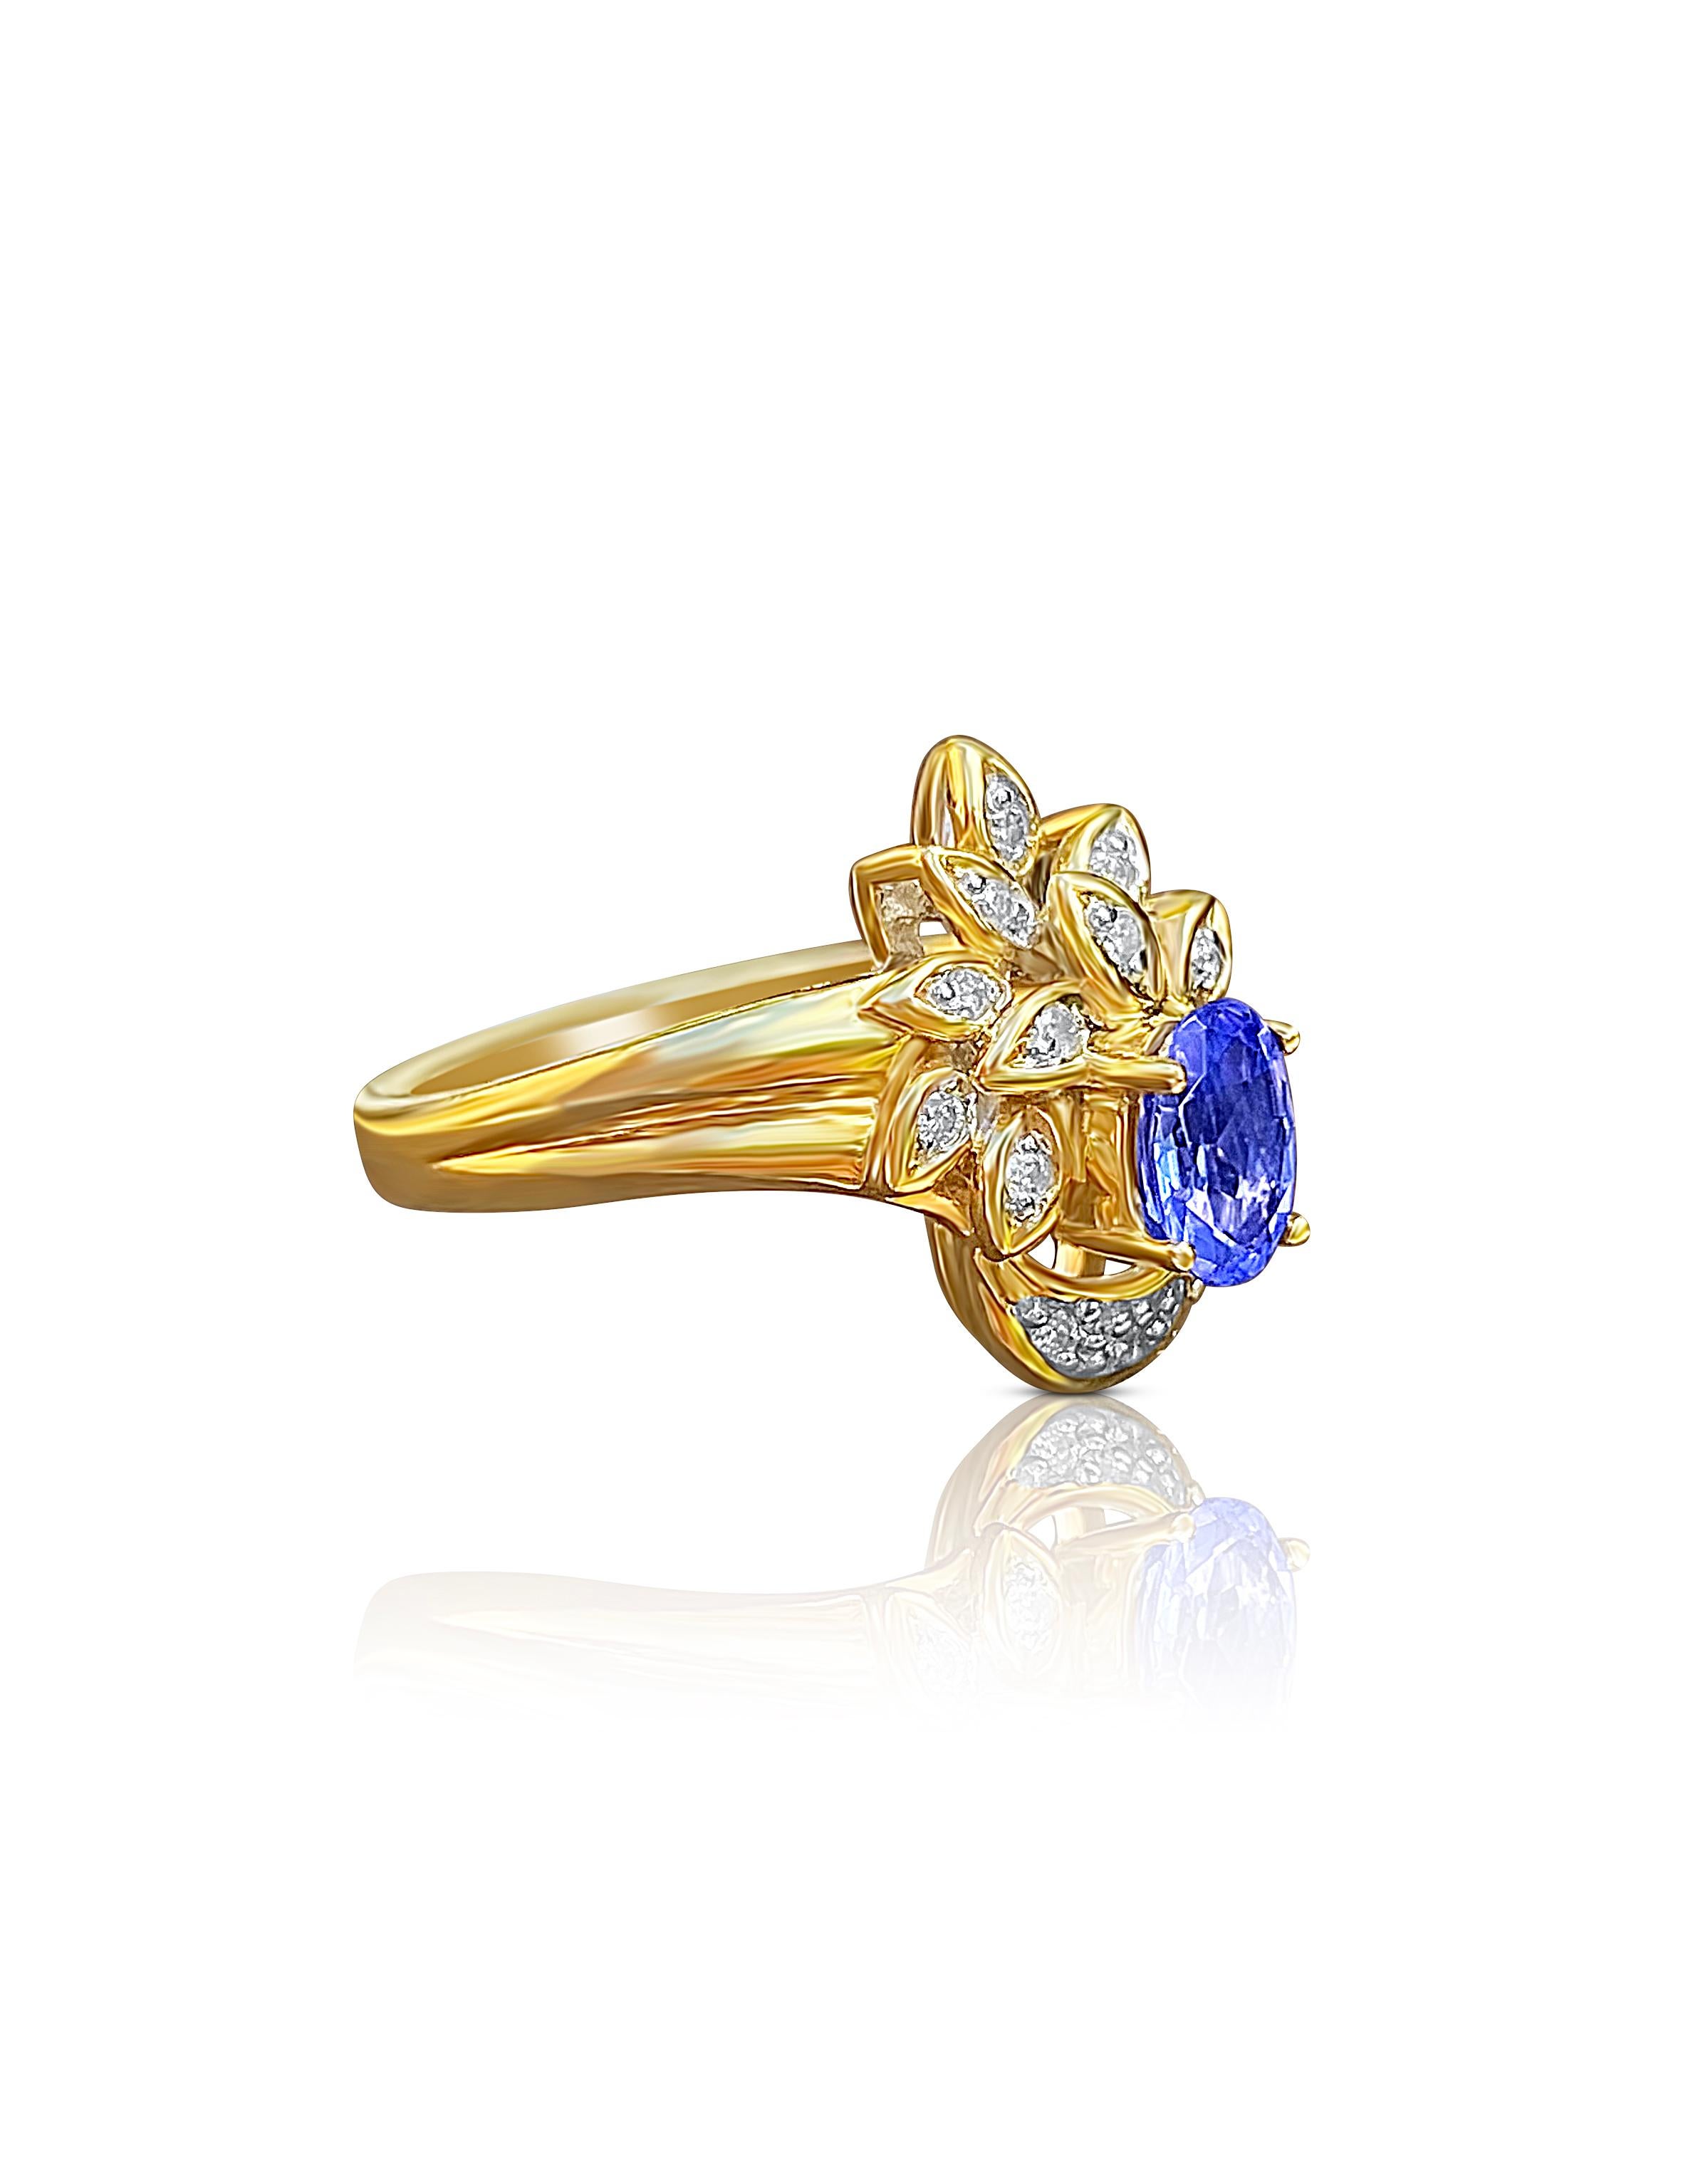 Centering a 0.69 Carat Oval-Cut Cornflower Blue Tanzanite, accented in a crown floral style by 0.11 carats of Round-Brilliant Cut Diamonds, and set in 14K Yellow Gold. 

Details:
✔ Stone: Tanzanite
✔ Center-Stone Weight: 0.69 carats
✔ Stone Cut: